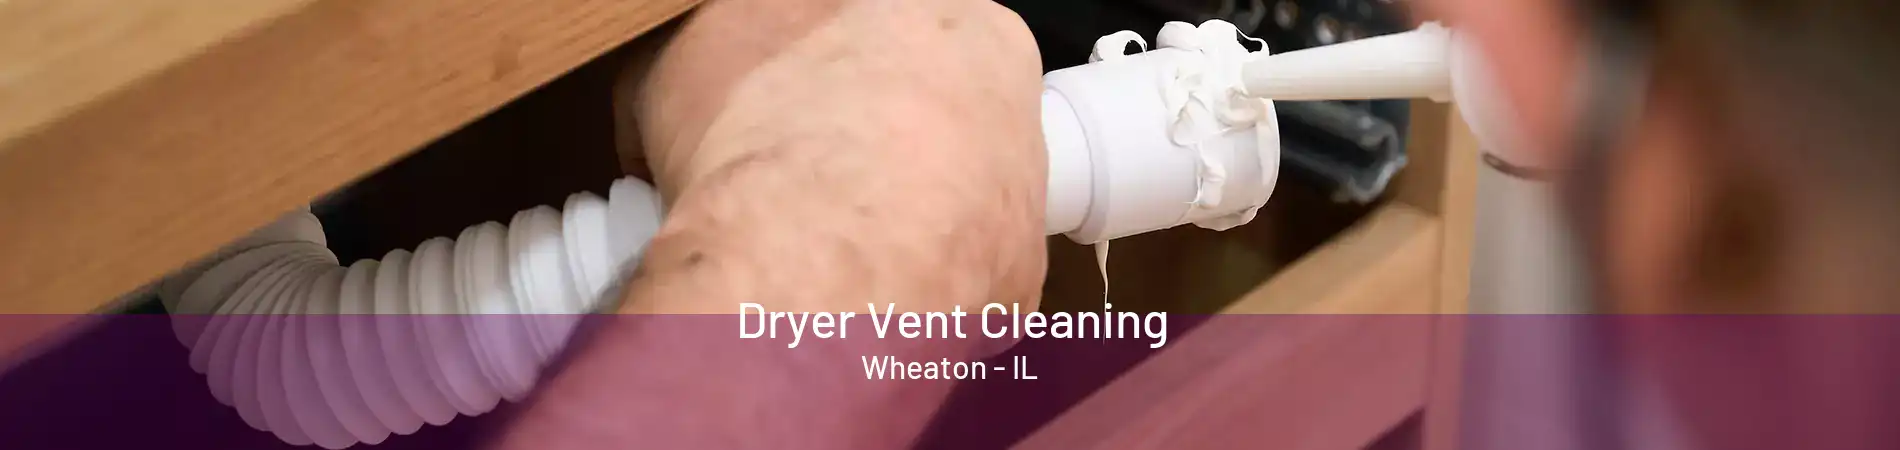 Dryer Vent Cleaning Wheaton - IL